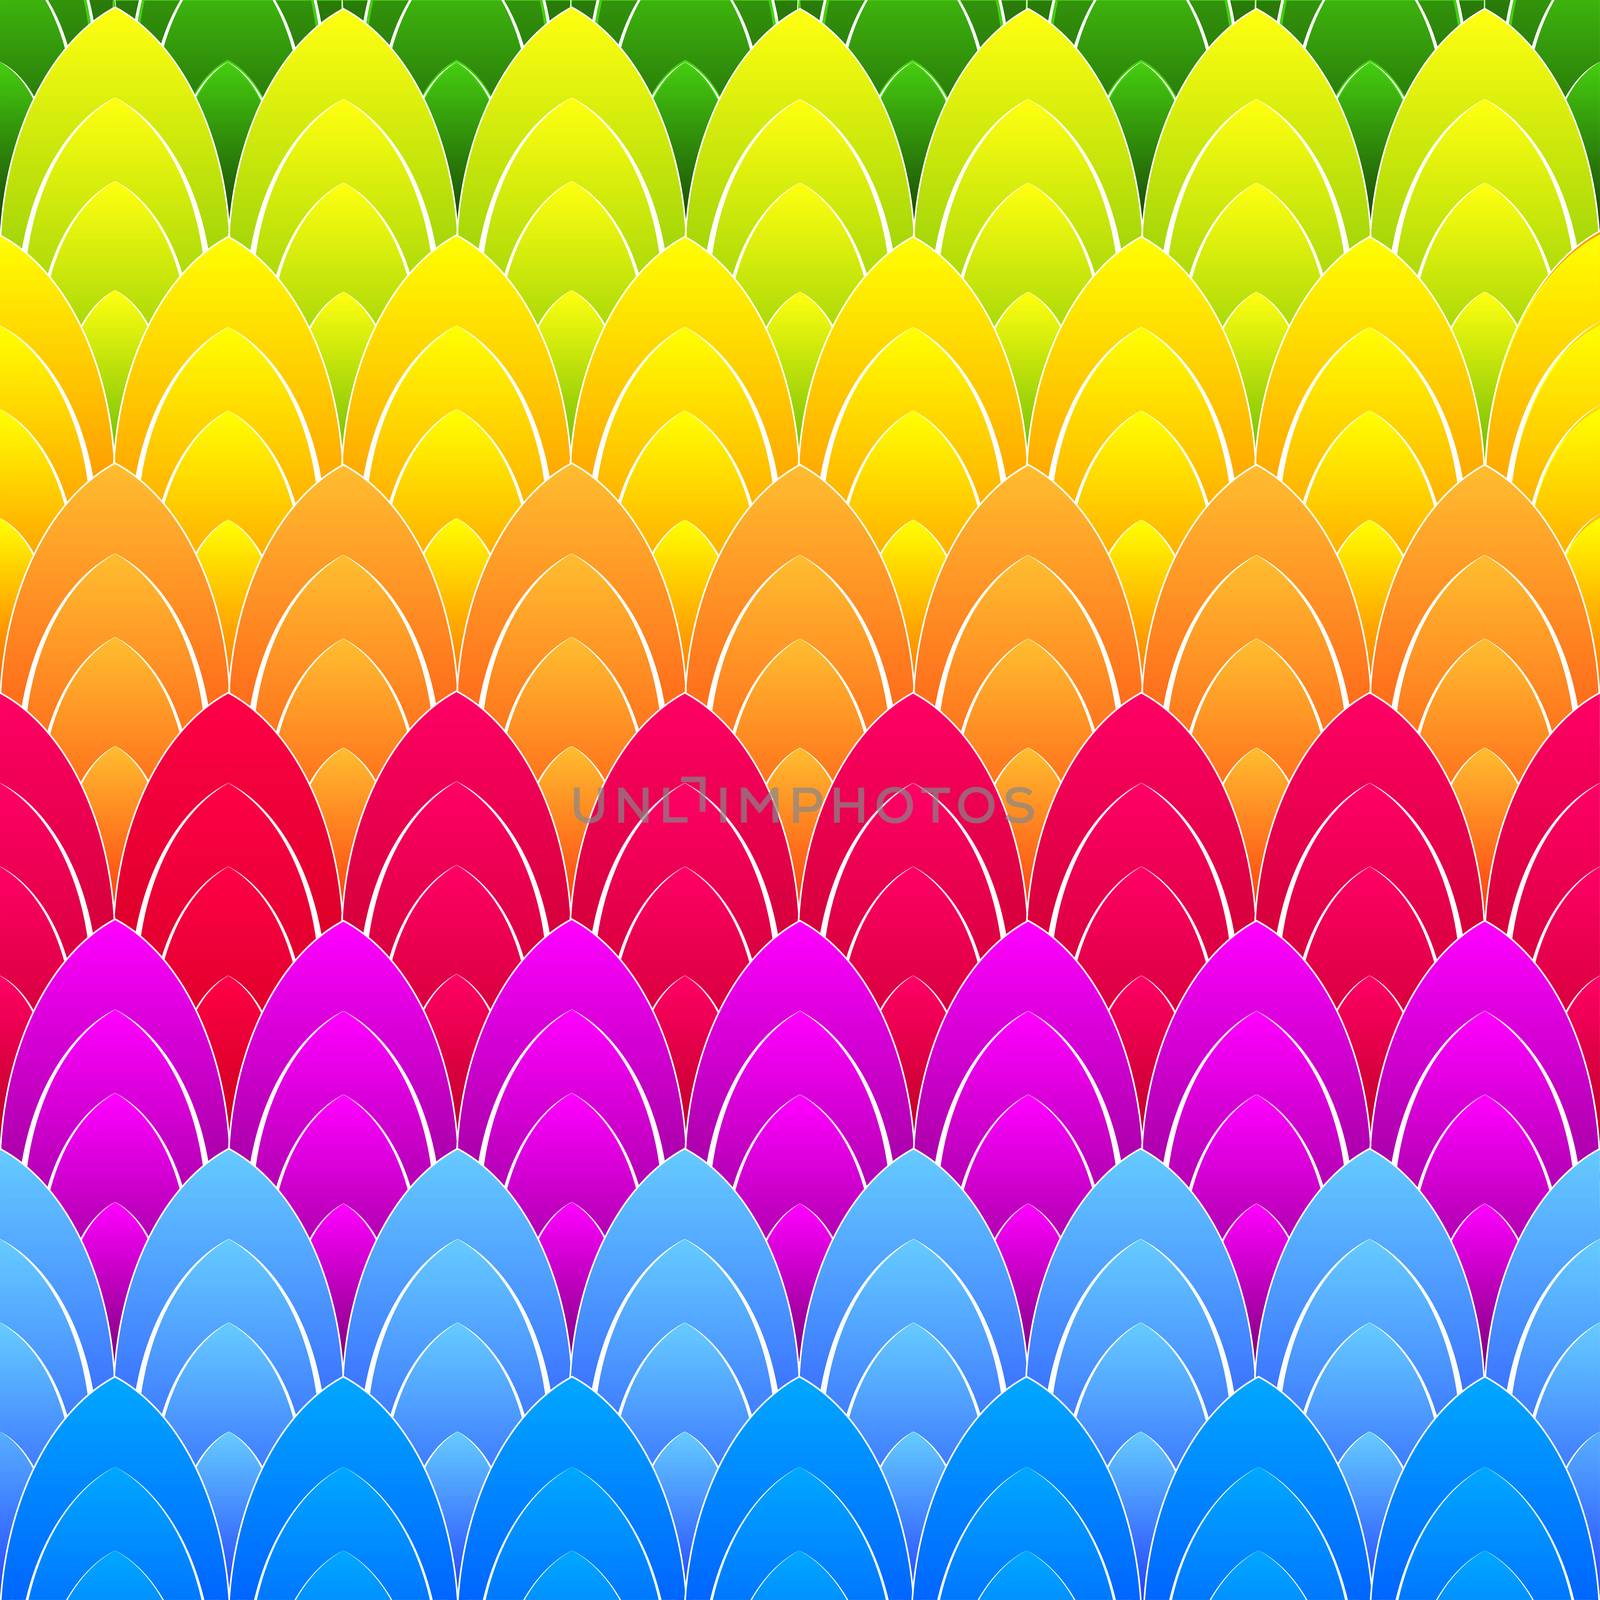 abstract background with concentric rainbow colourful ellipses